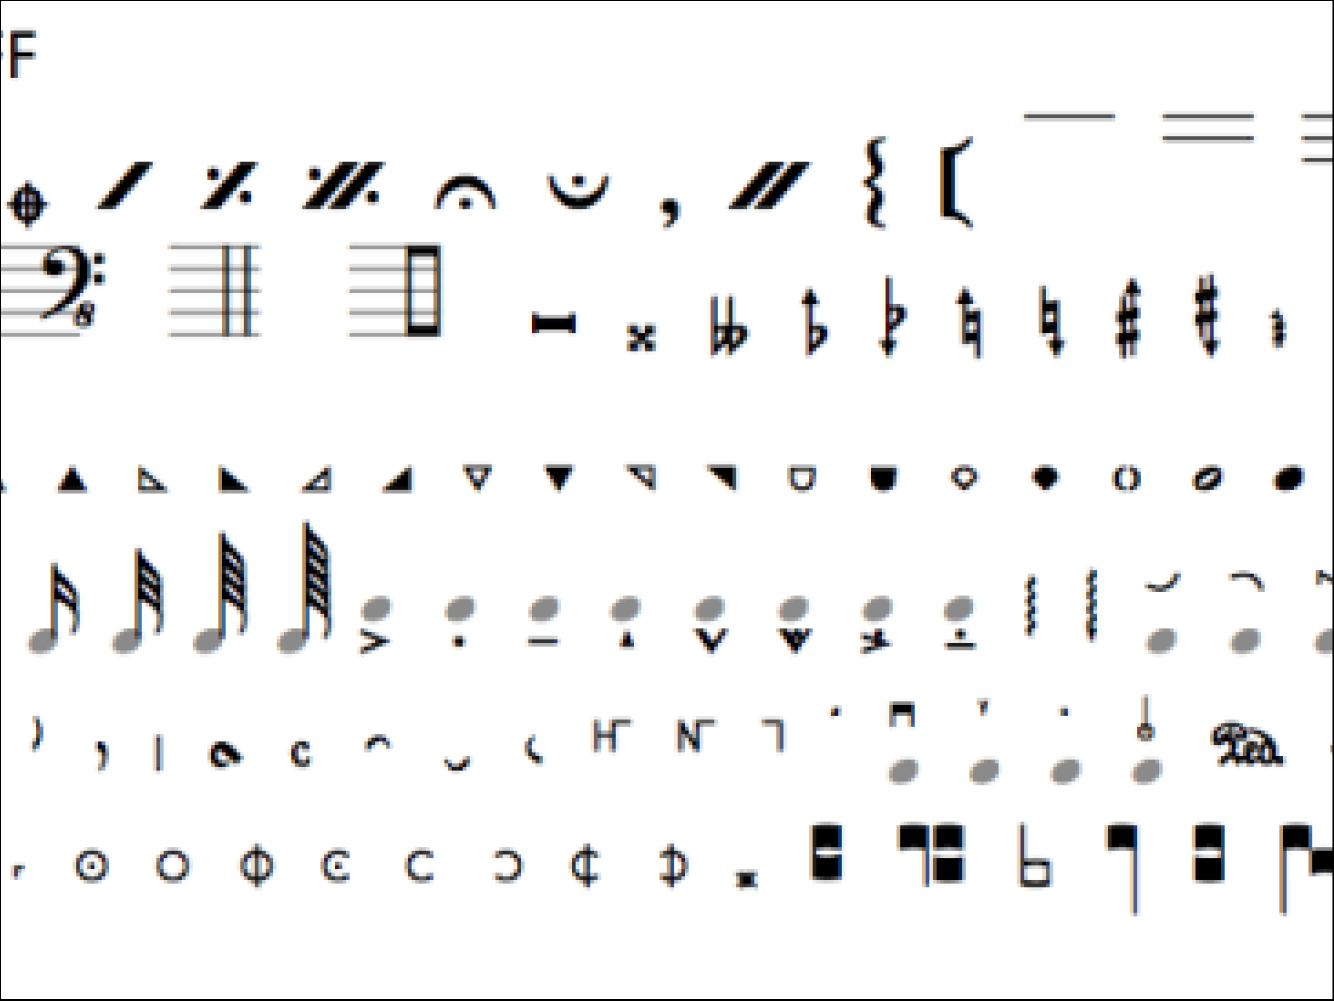 music notes font in word